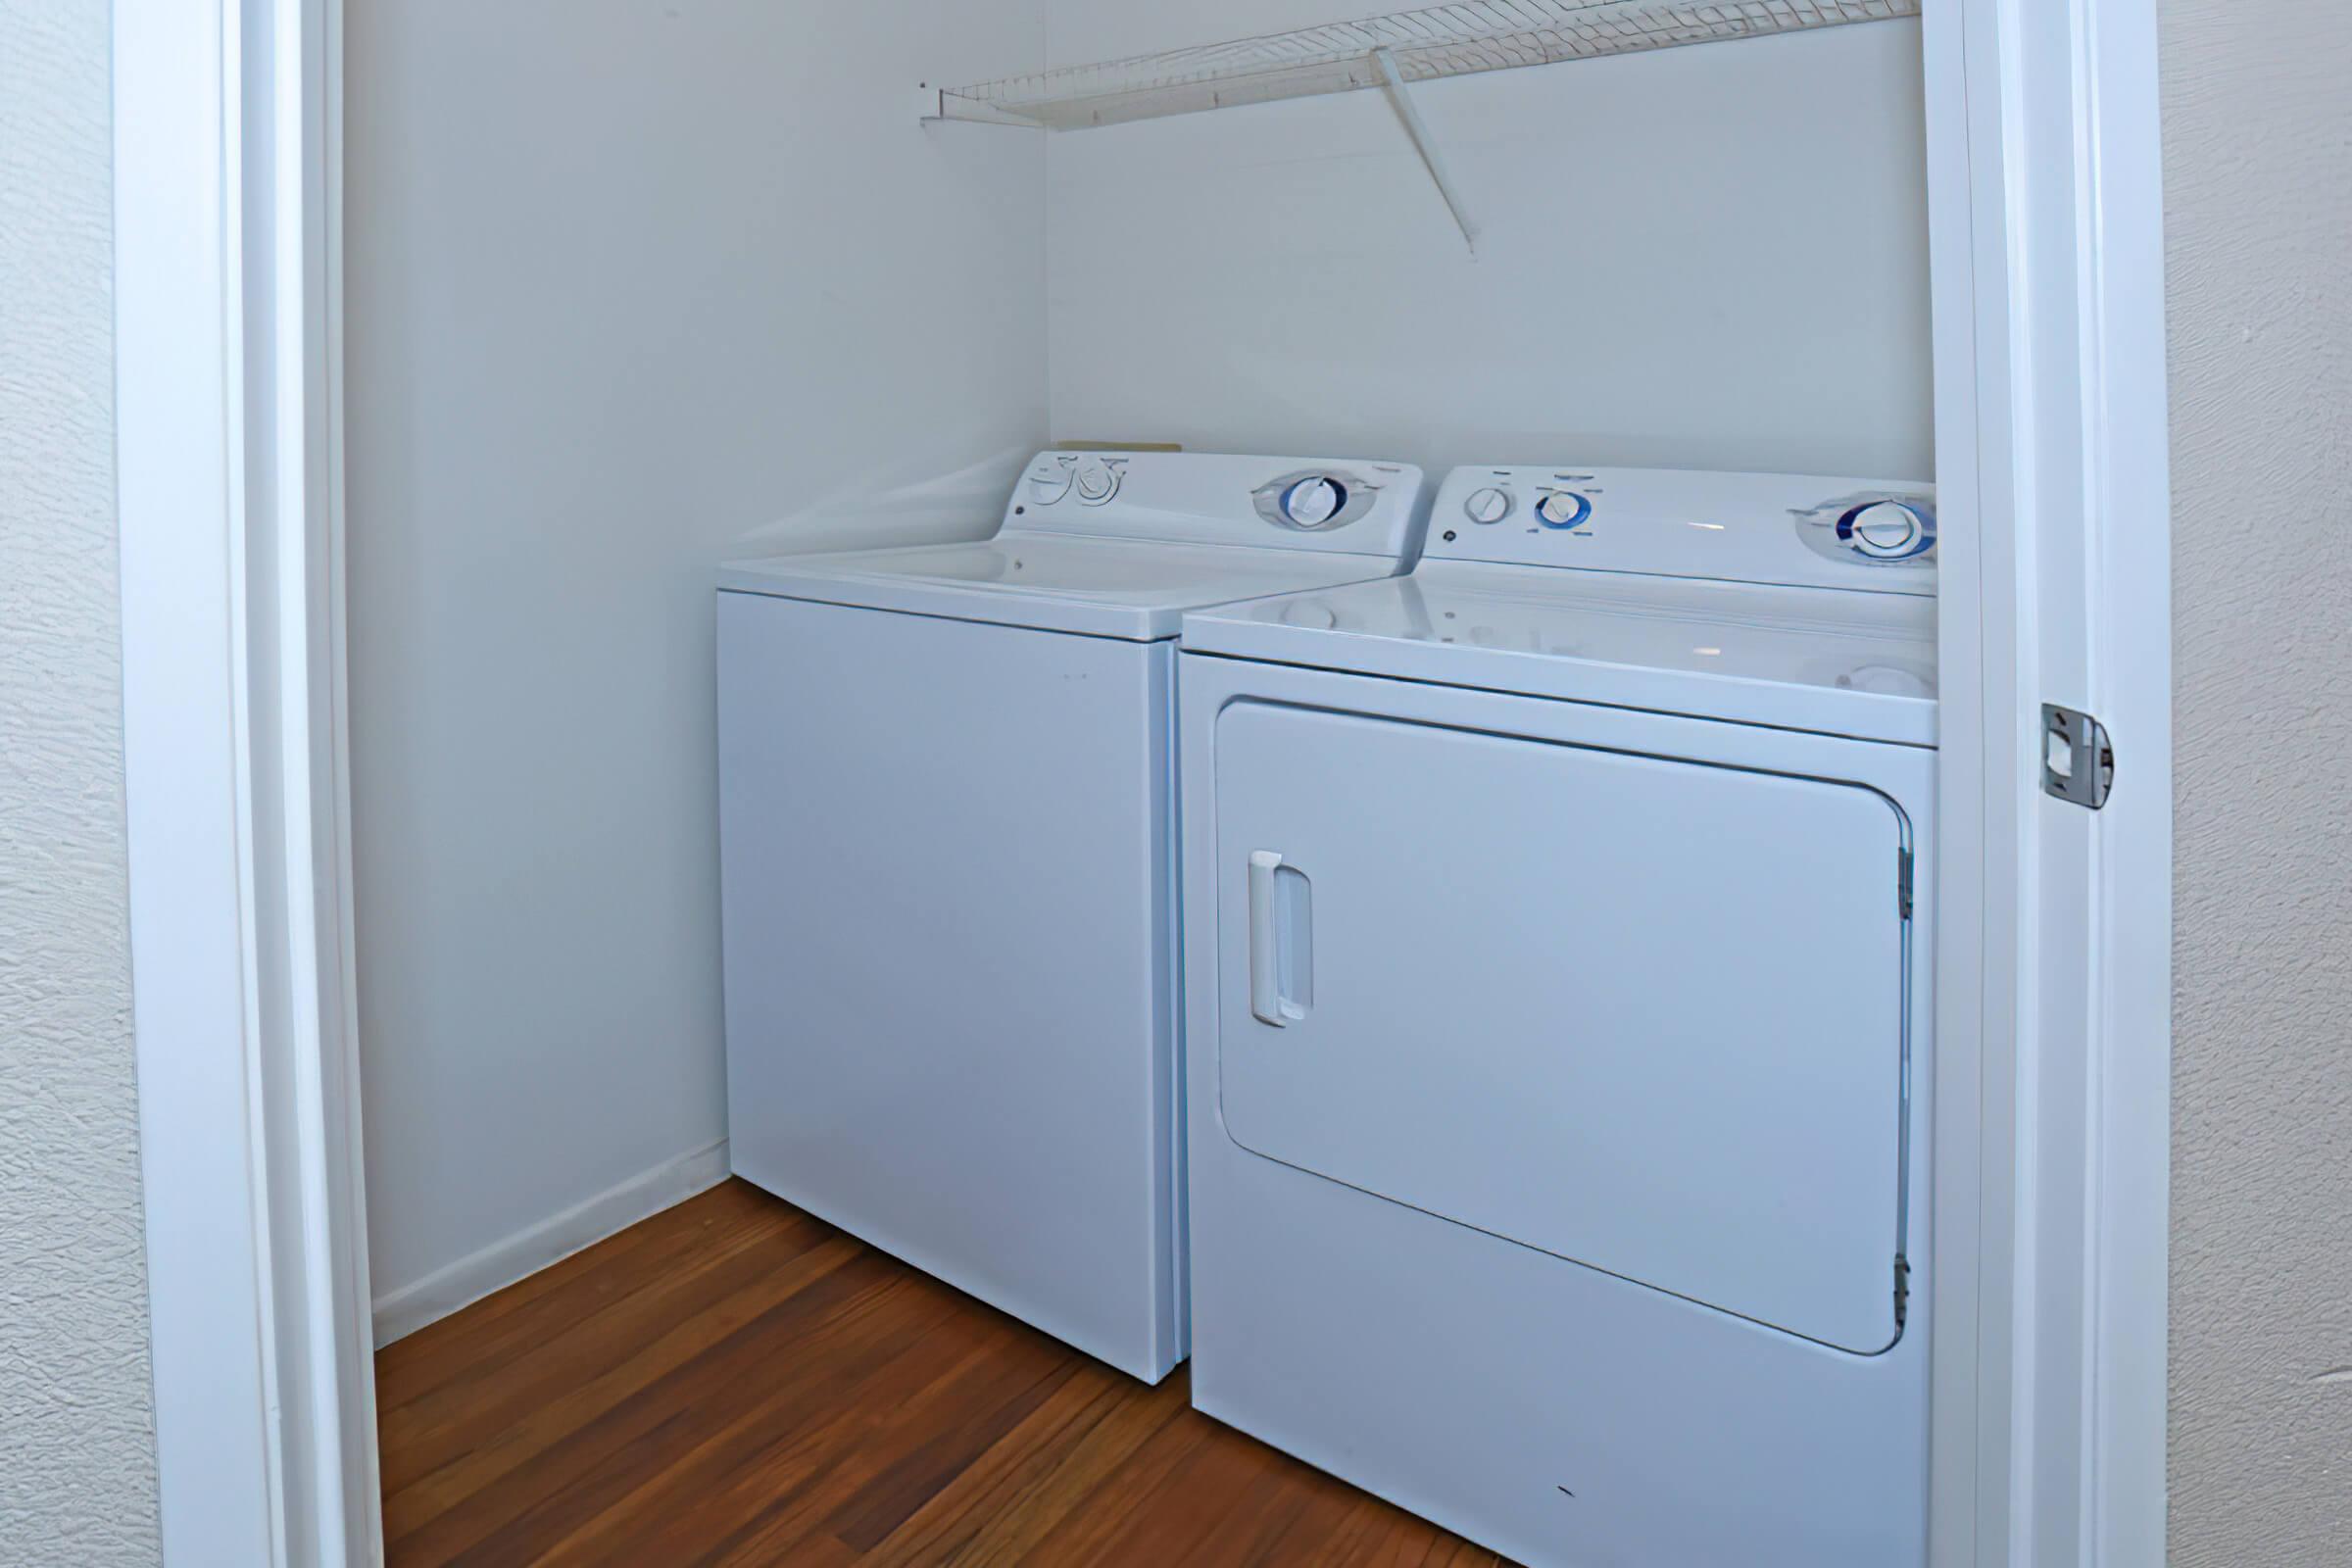 YOUR OWN WASHER AND DRYER